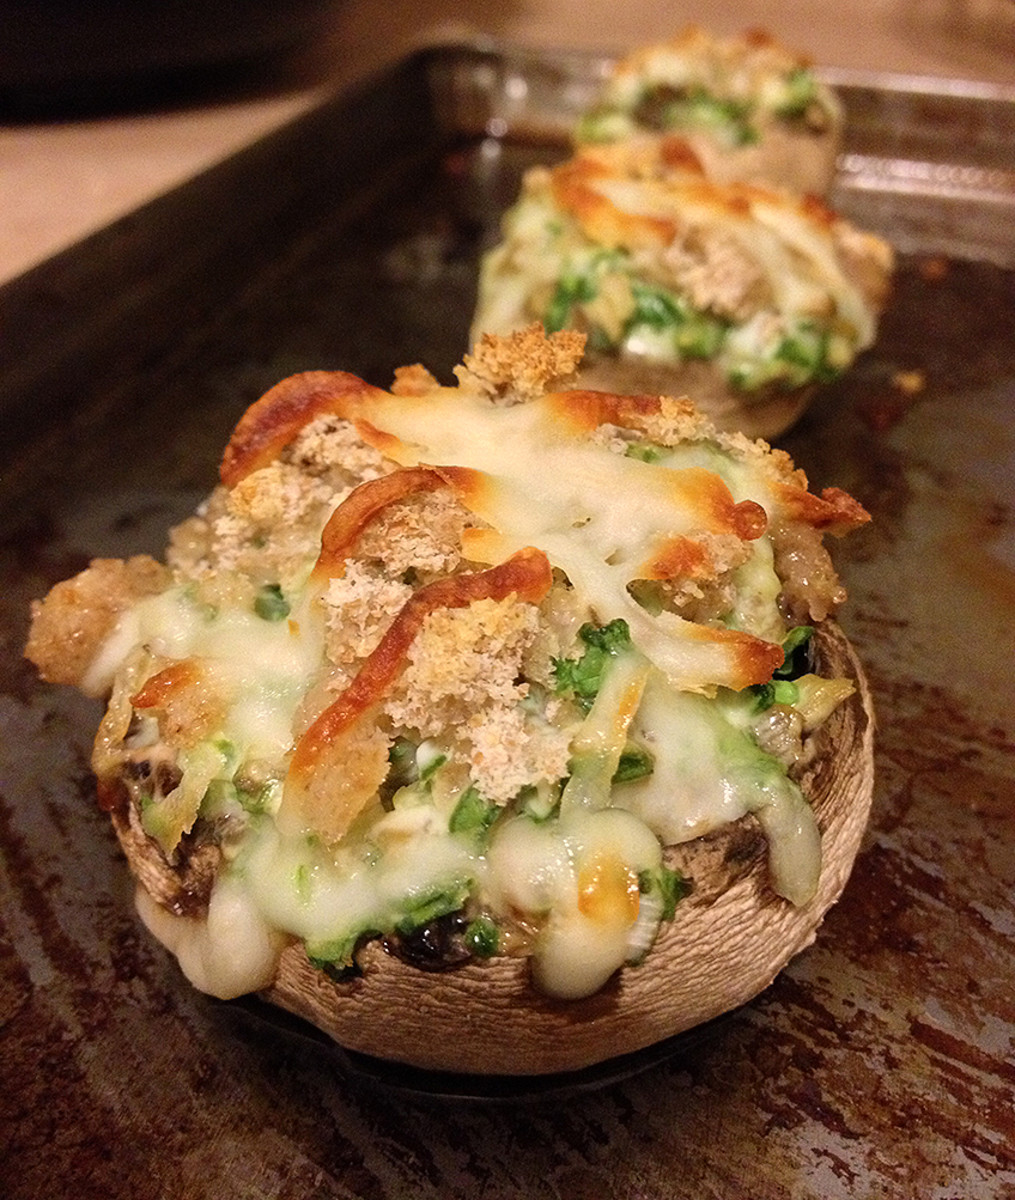 Oven-Baked Spinach and Cheese Stuffed Mushrooms With Parmesan